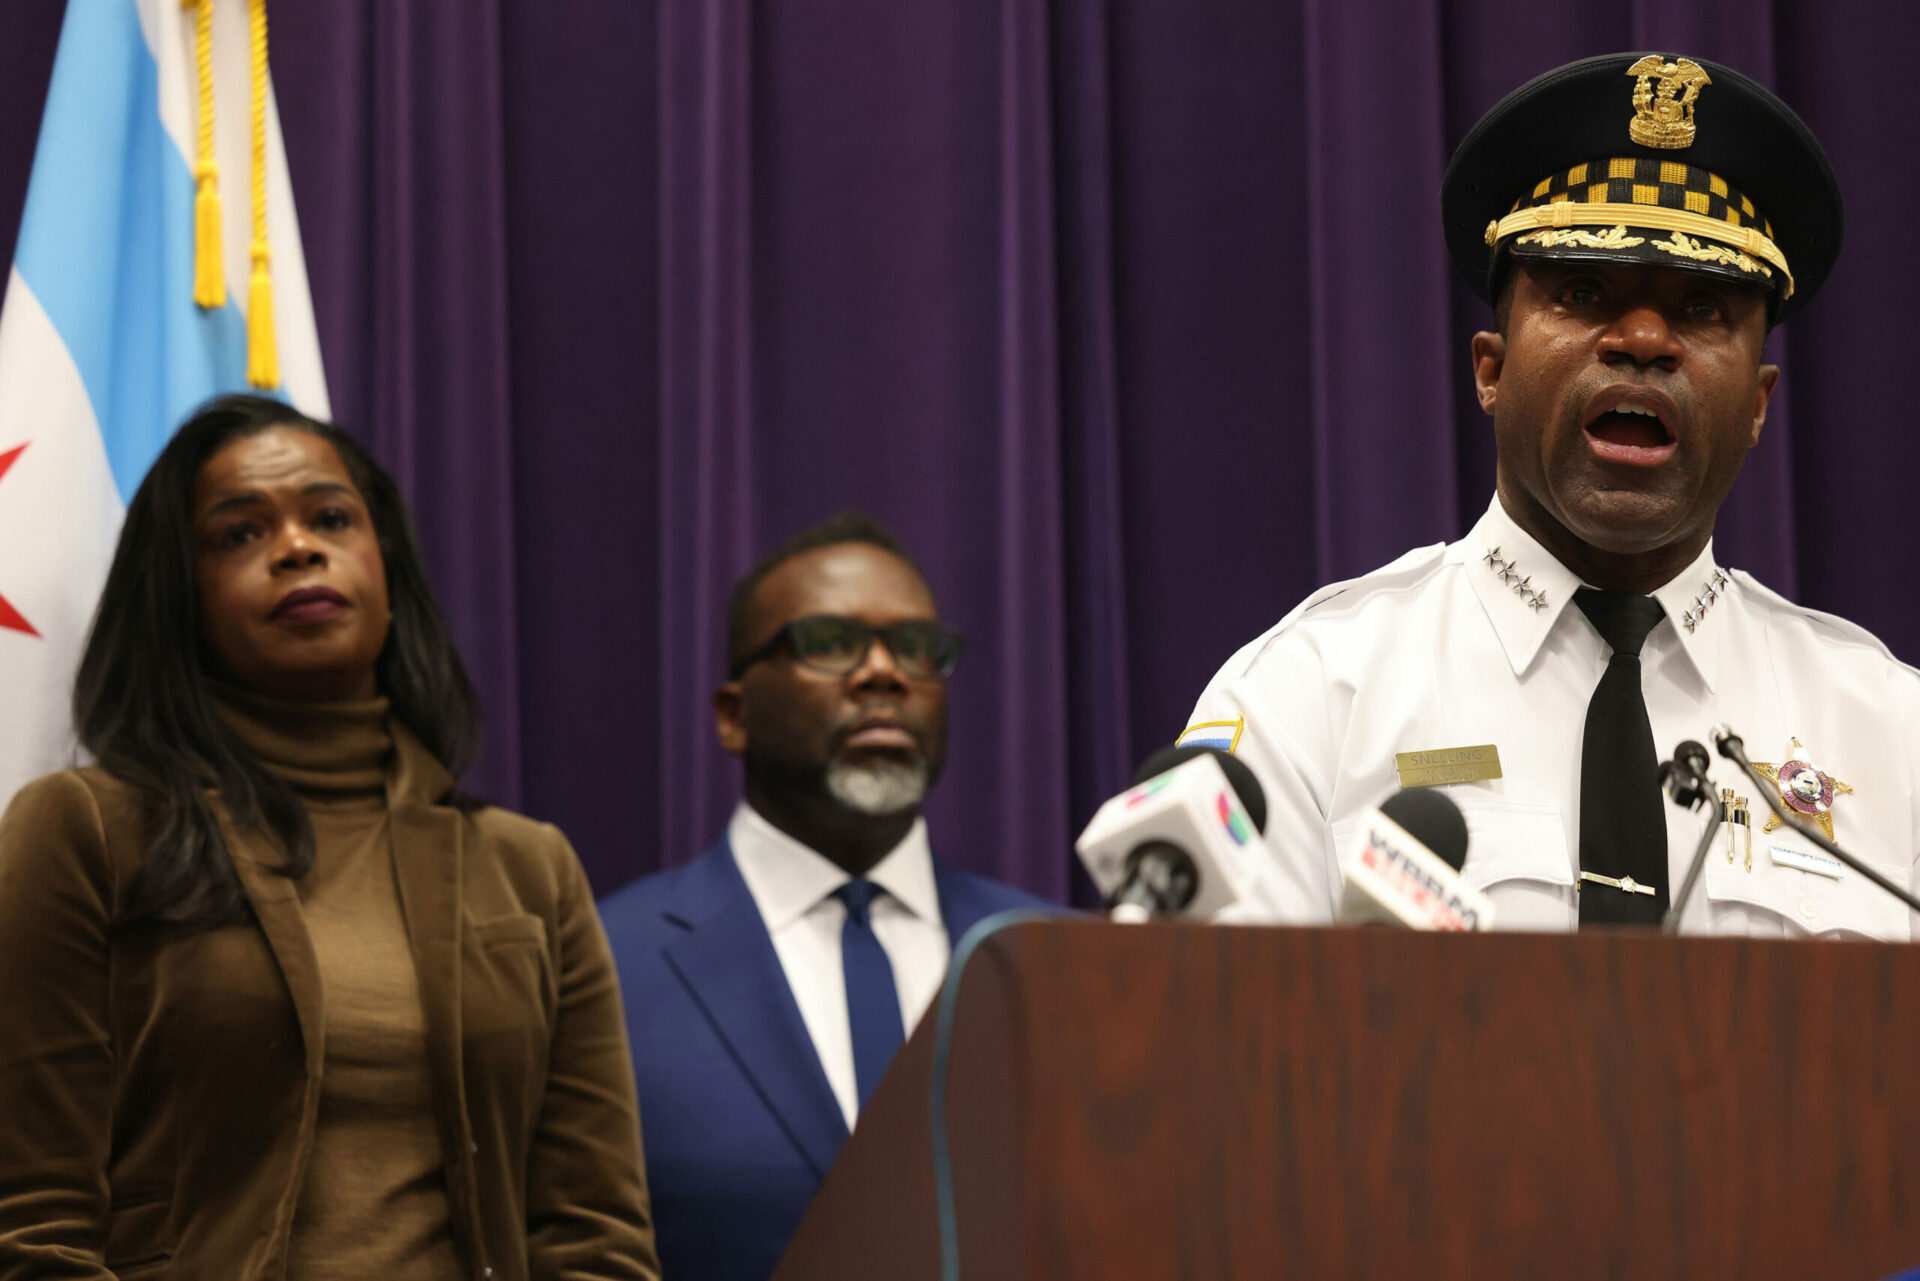 Man charged in Chicago shooting that wounded 15, including 2 critically